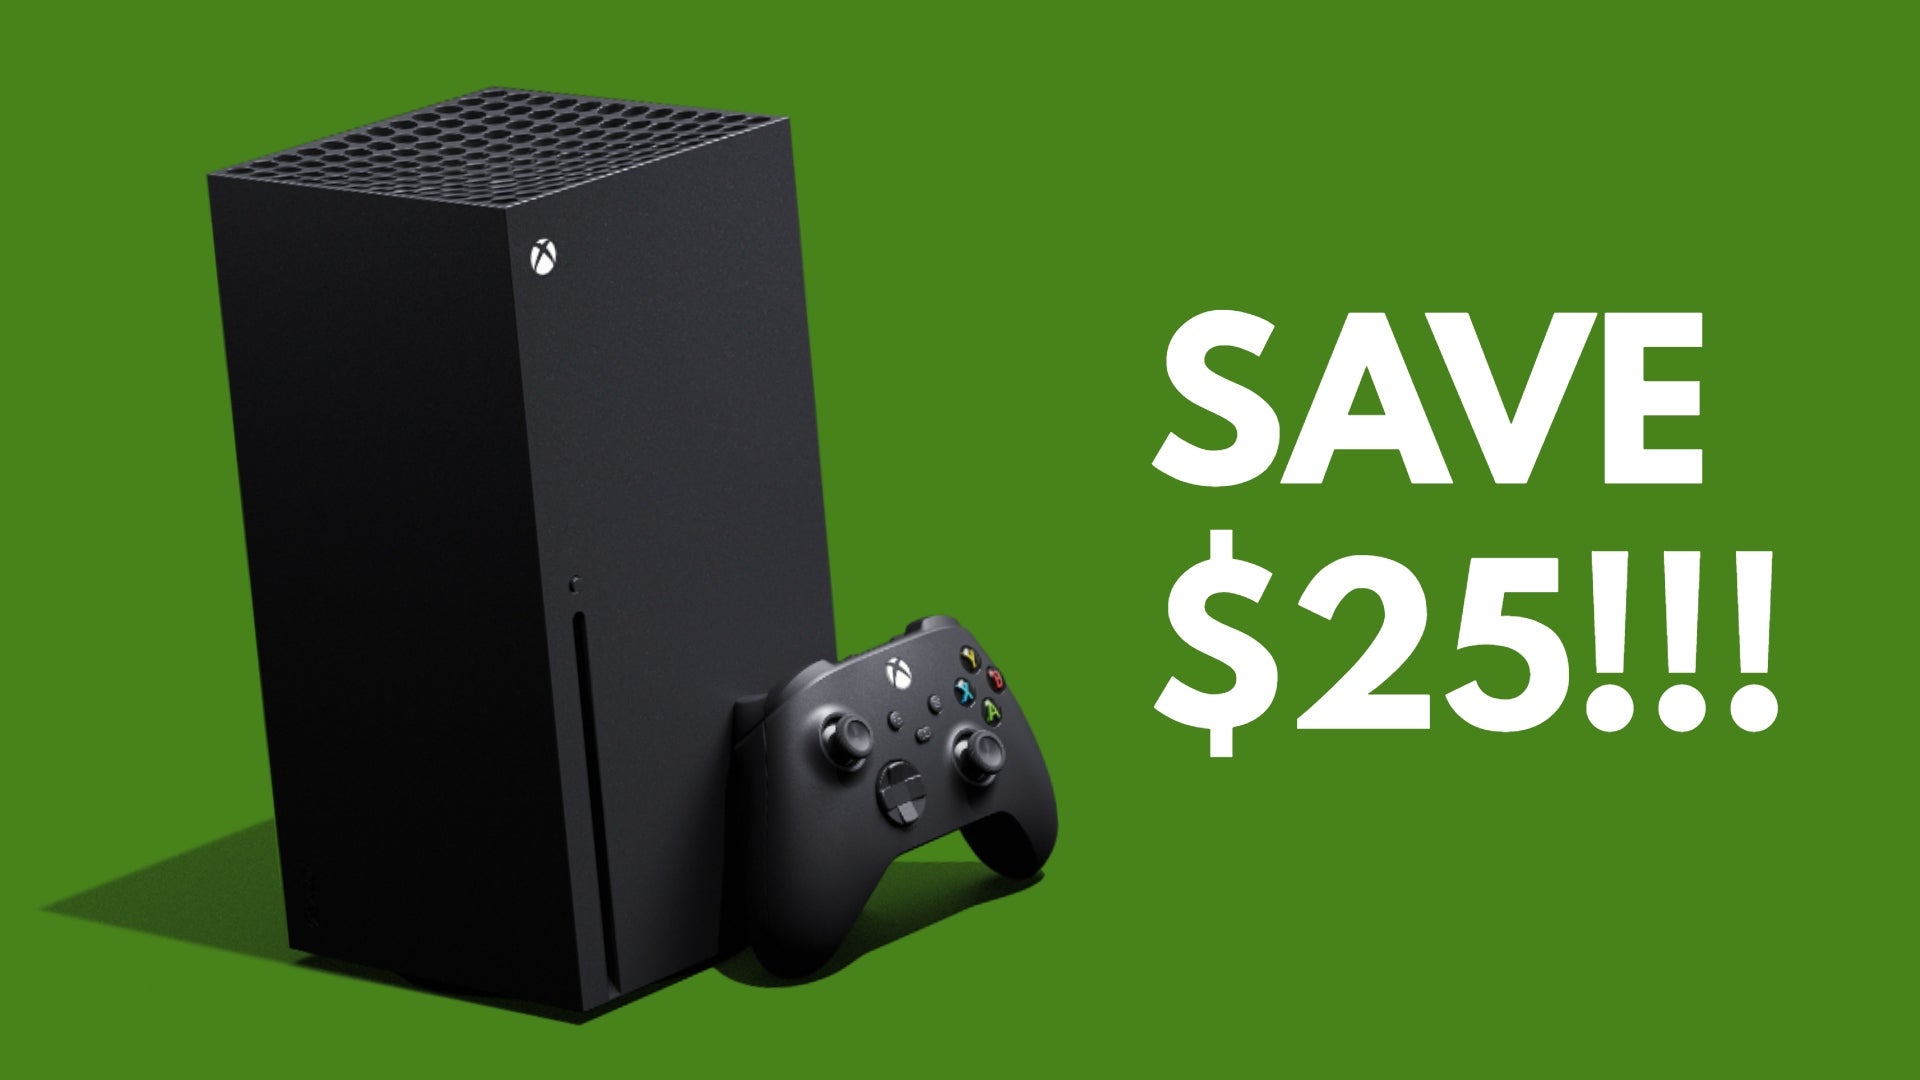 Save $25 on an Xbox Series X console with this limited-time 